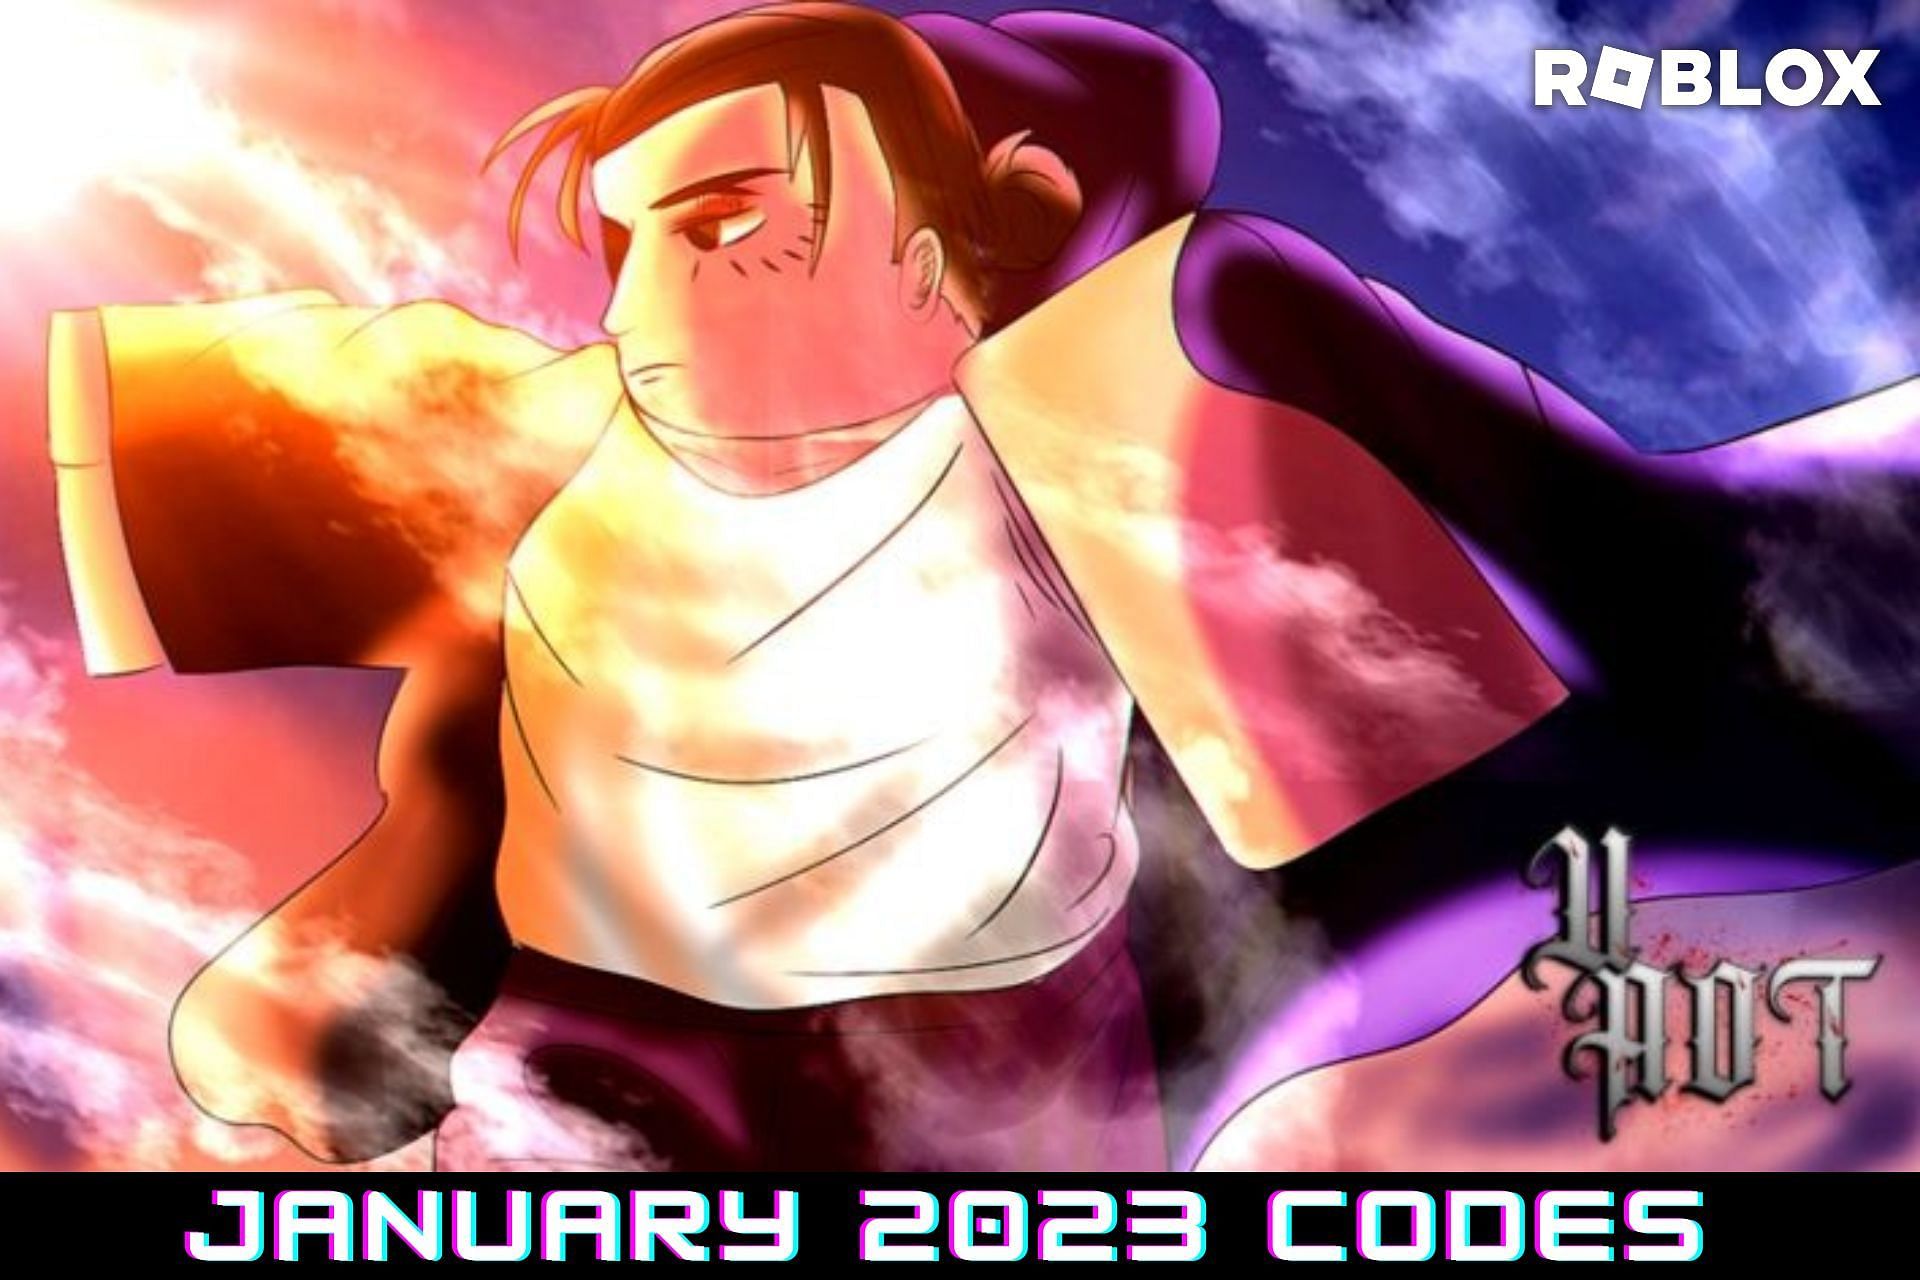 NEW* ALL WORKING CODES FOR UNTITLED BOXING GAME IN JULY 2023